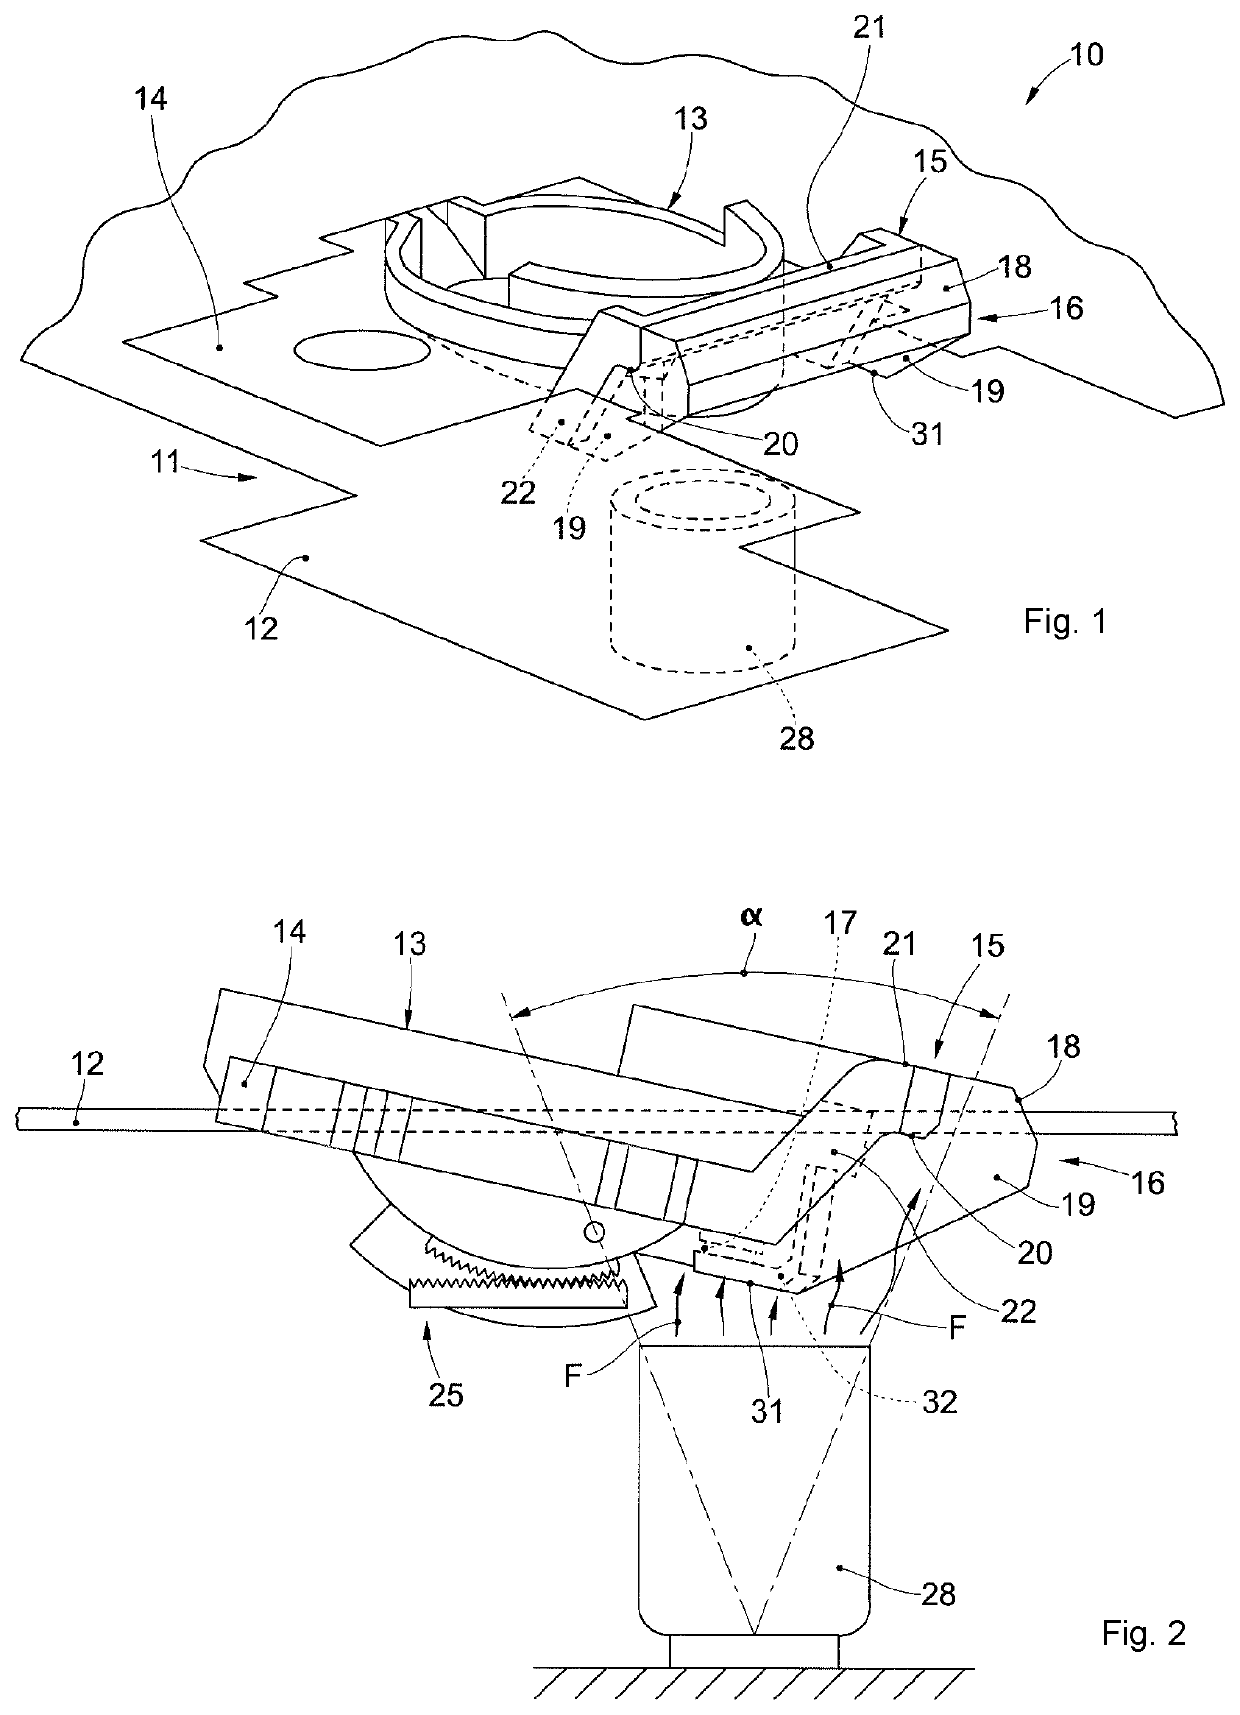 Melting apparatus for the production of steel